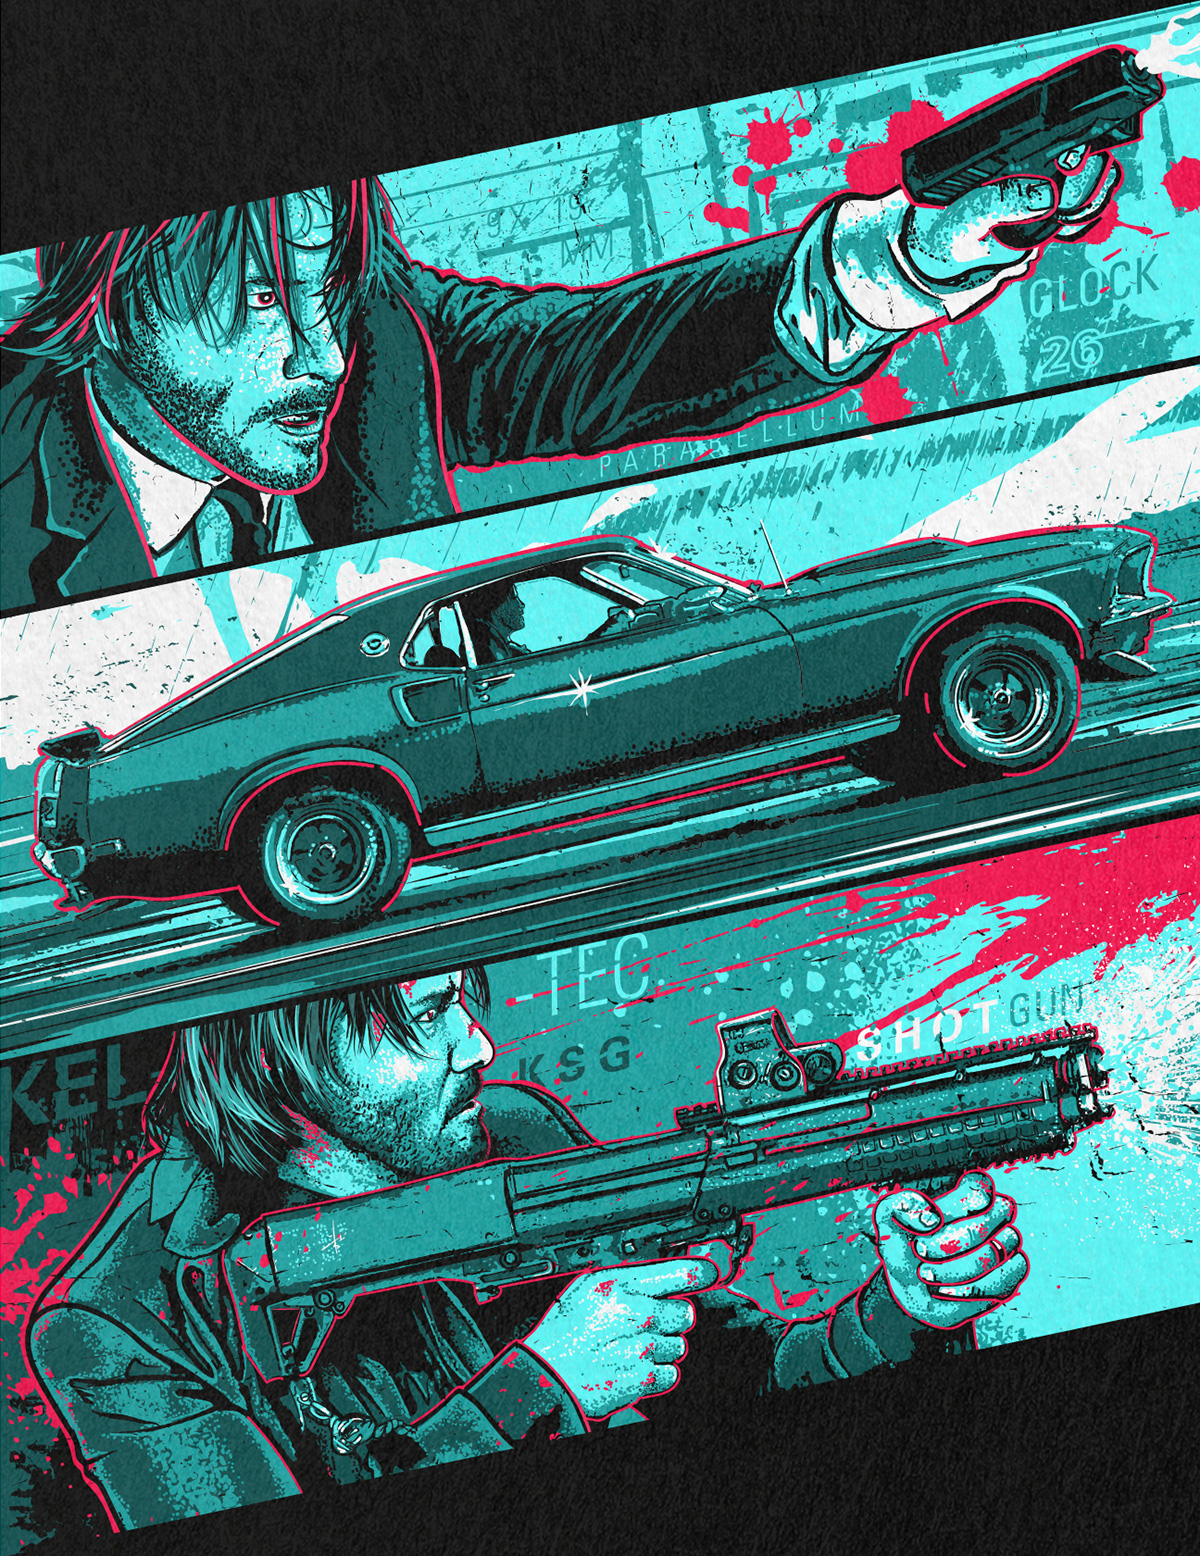 keanureeves johnwick wick Movies poster screenprint posters design privatecommission changethethought denver